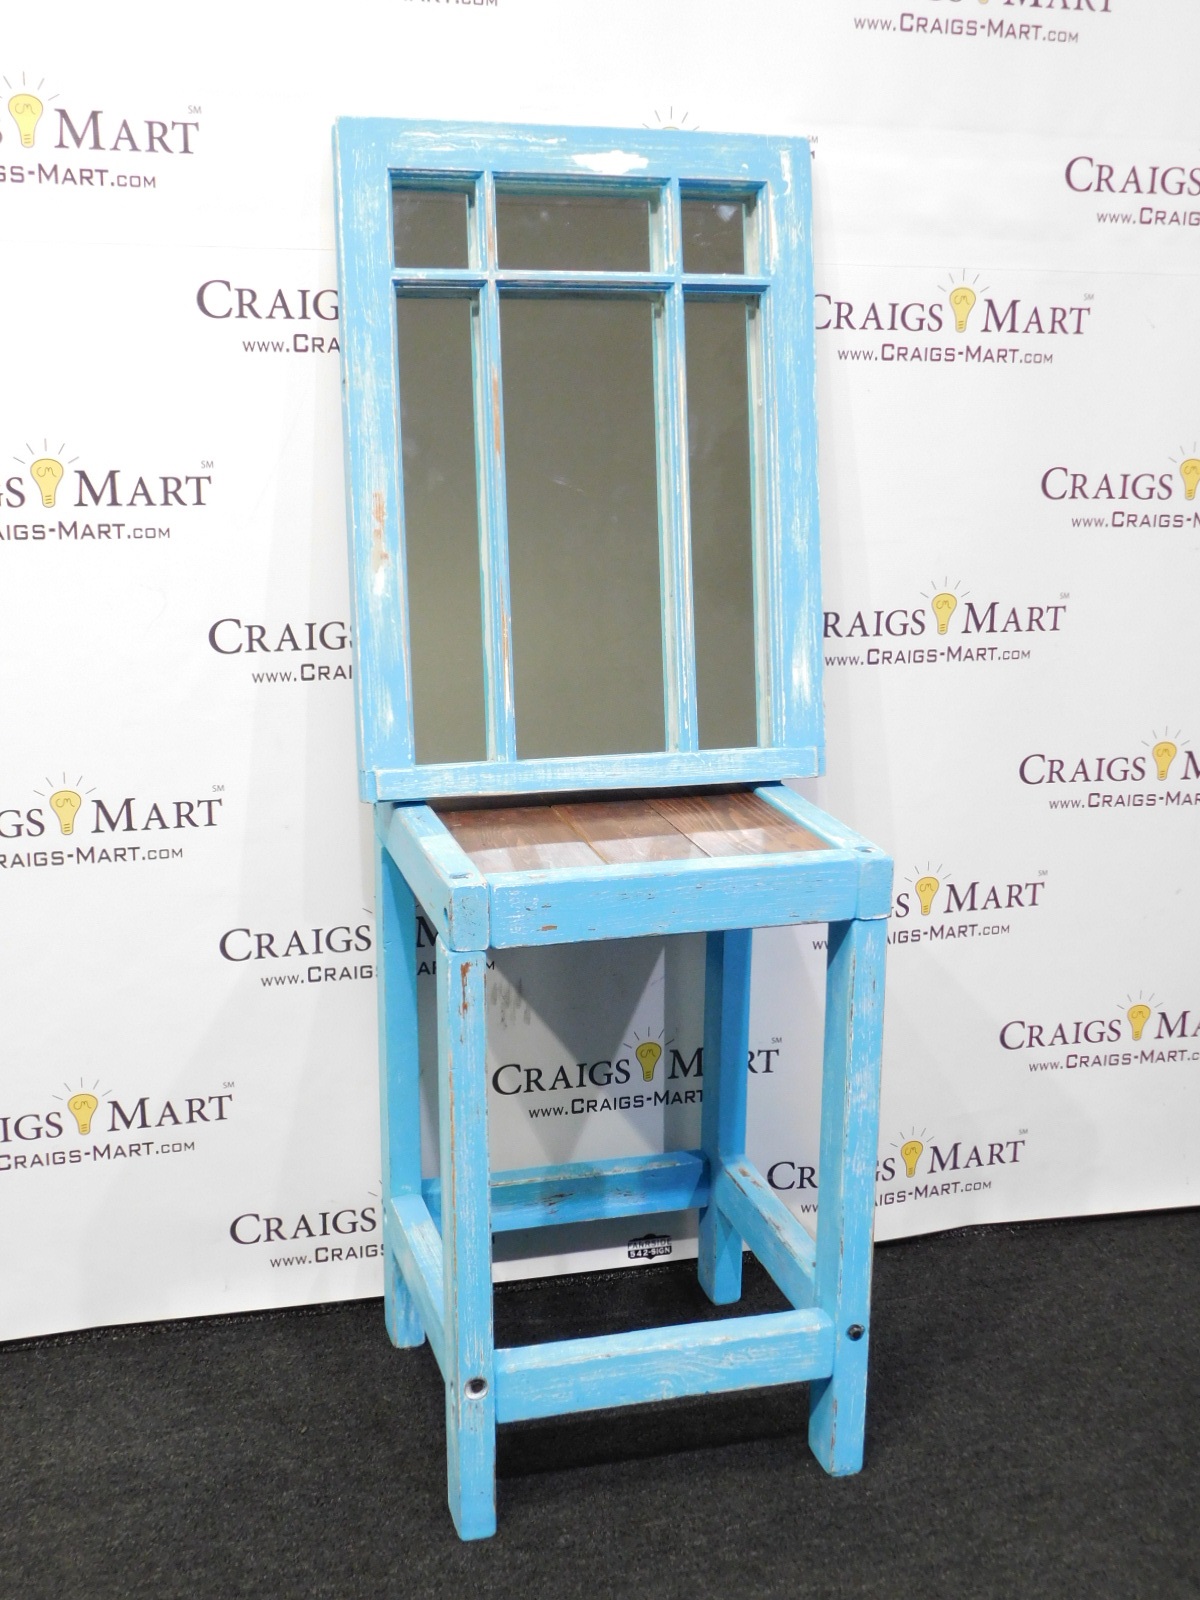 handcrafted distressed accent table mirror craigs mart blue pretty storage boxes ikea large outdoor cover mirrored dresser target piece living room set black marble dining swing